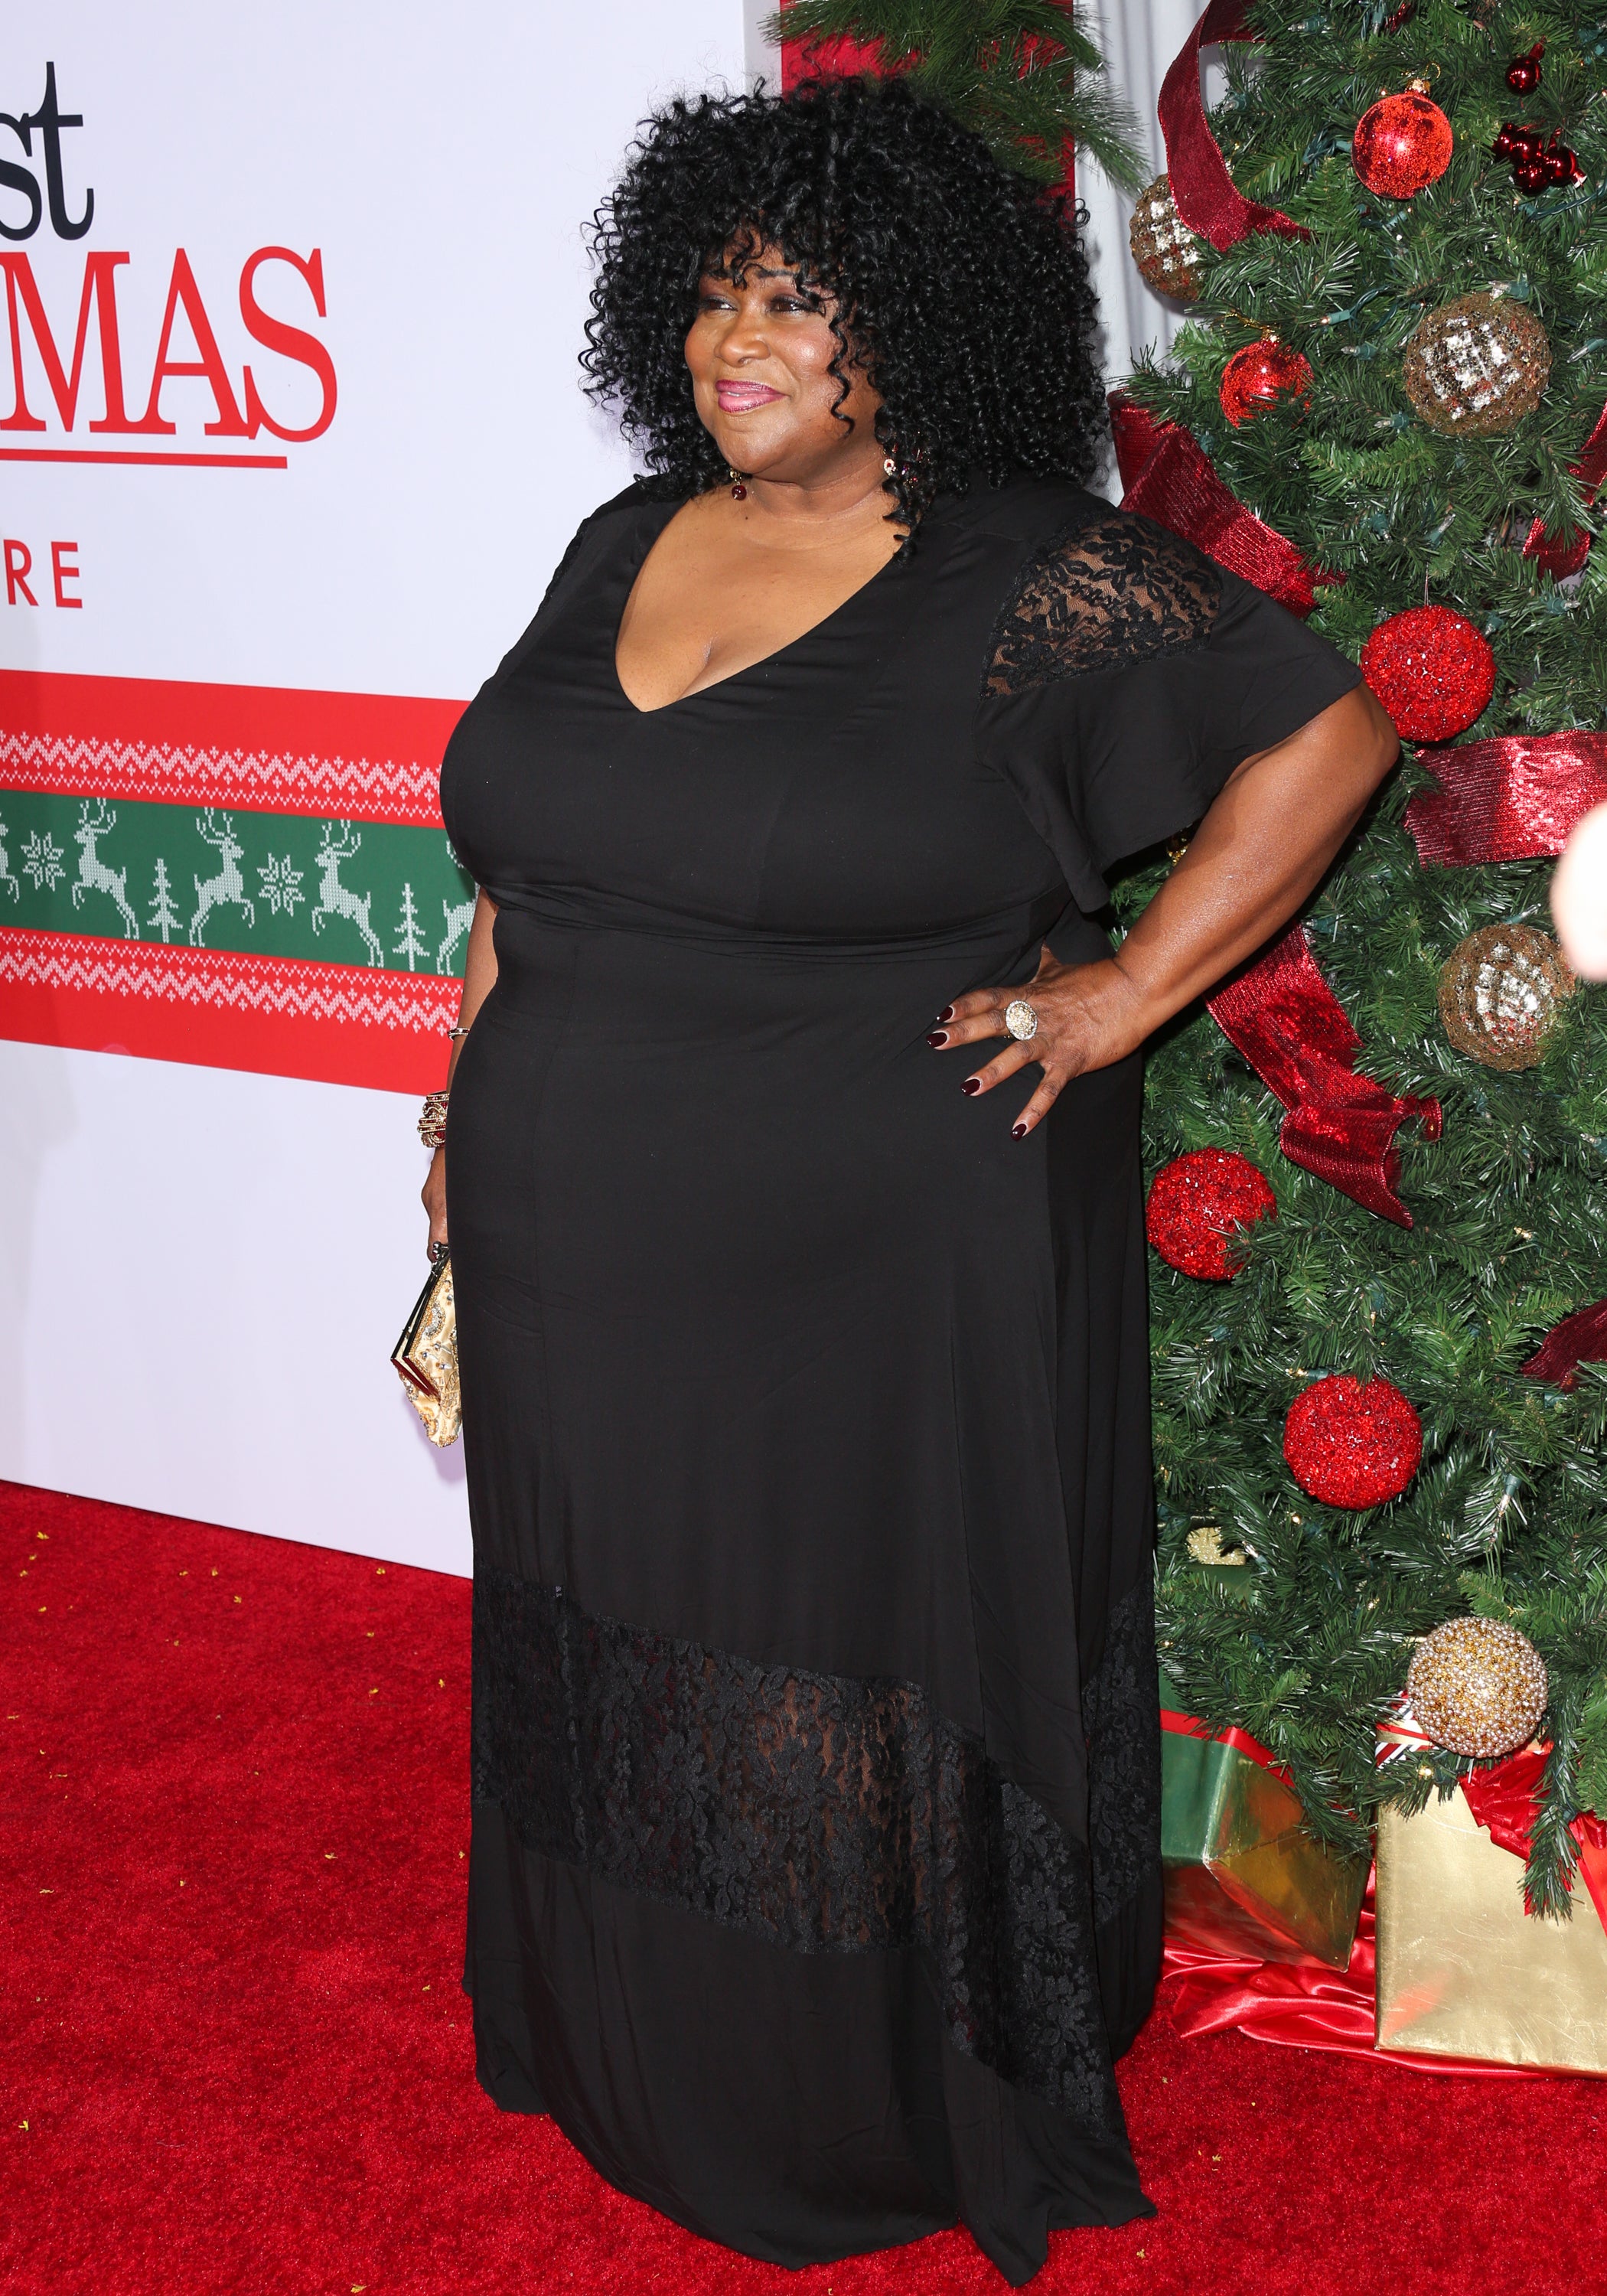 Celebs Get Festive at the 'Almost Christmas' Premiere 
